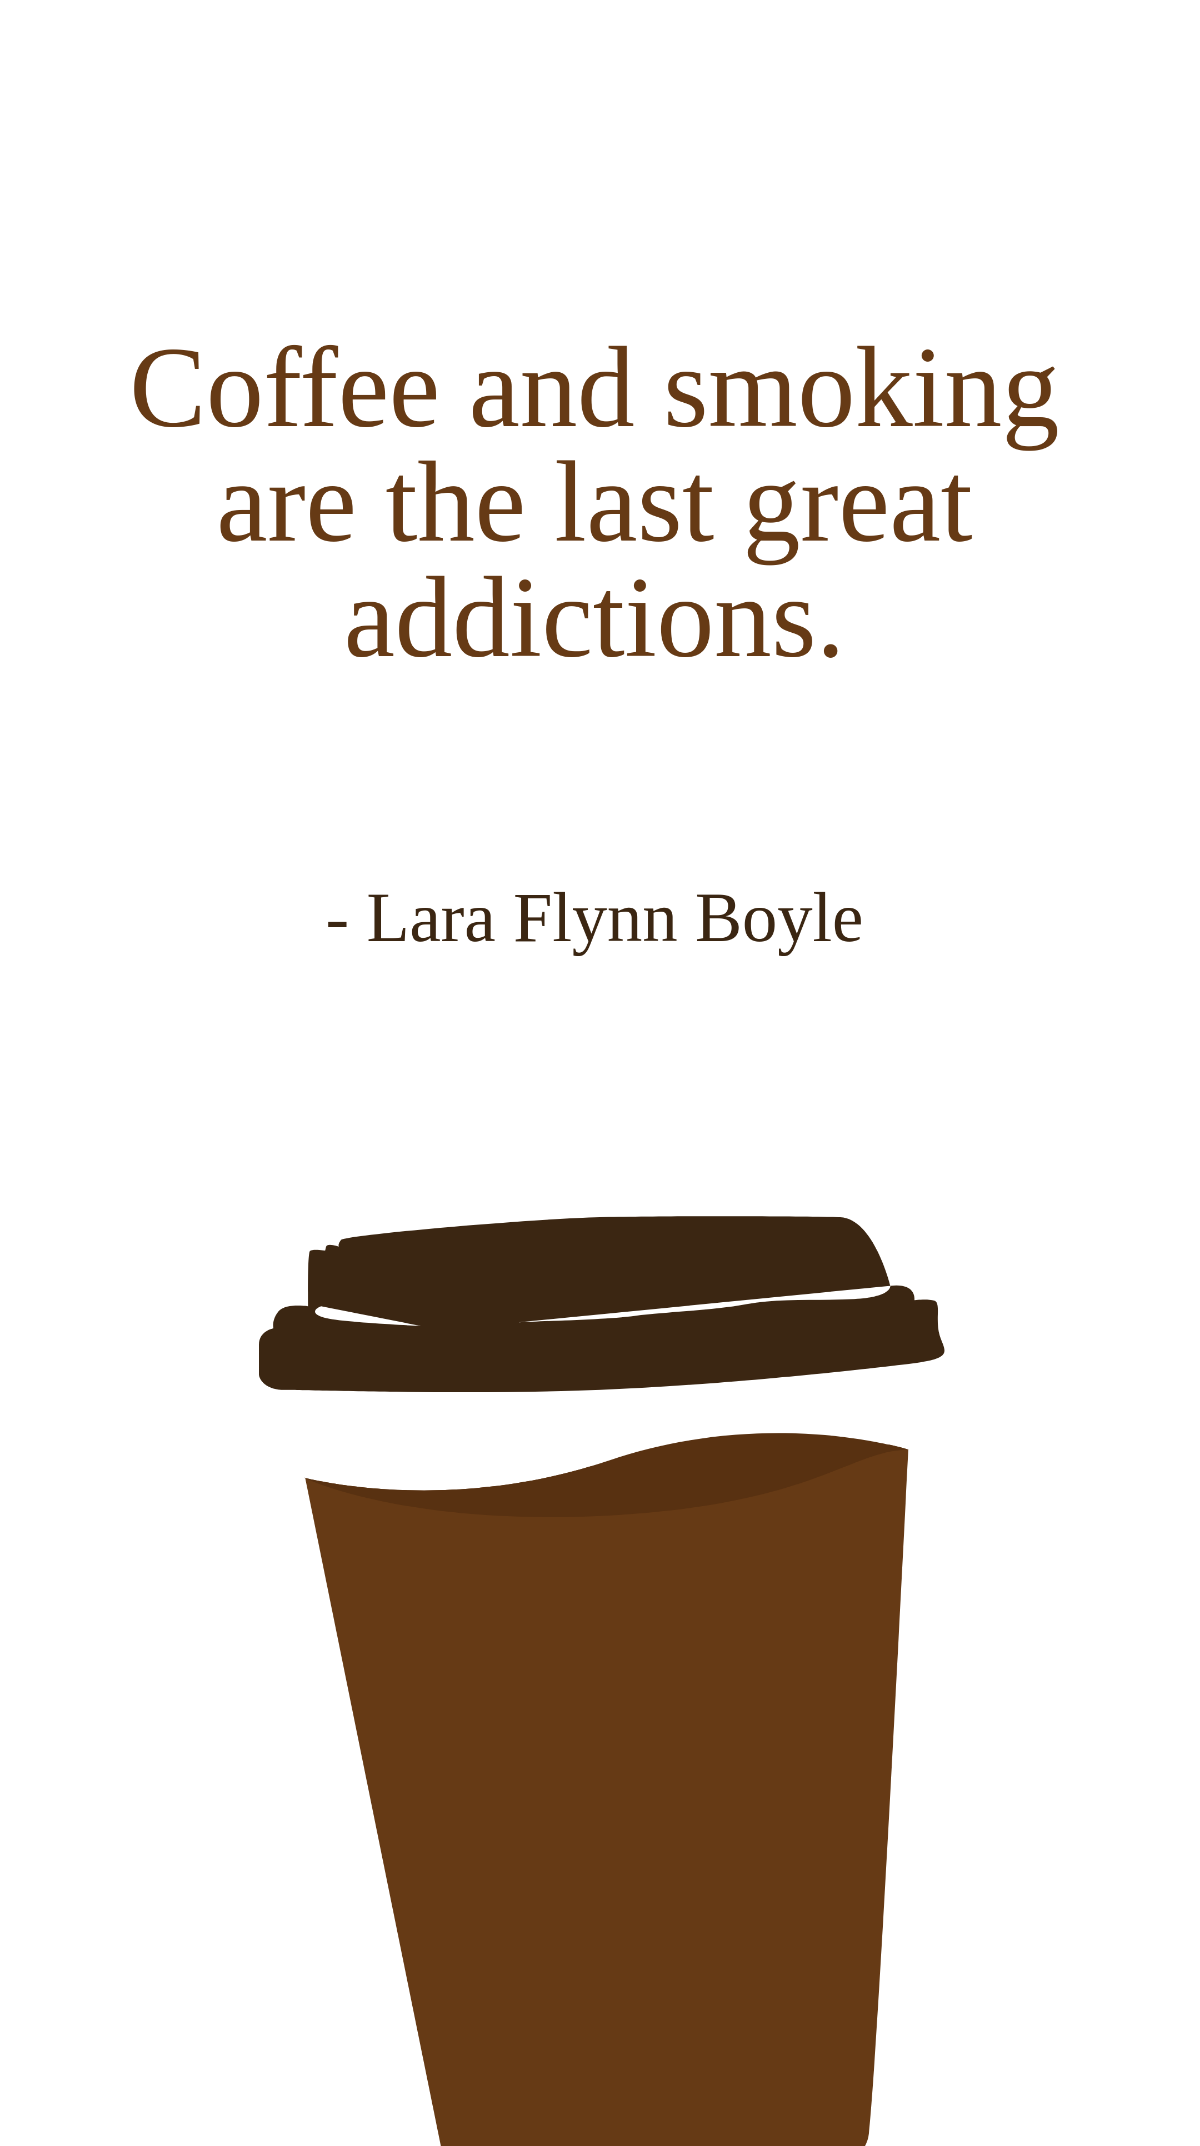 Lara Flynn Boyle - Coffee and smoking are the last great addictions.